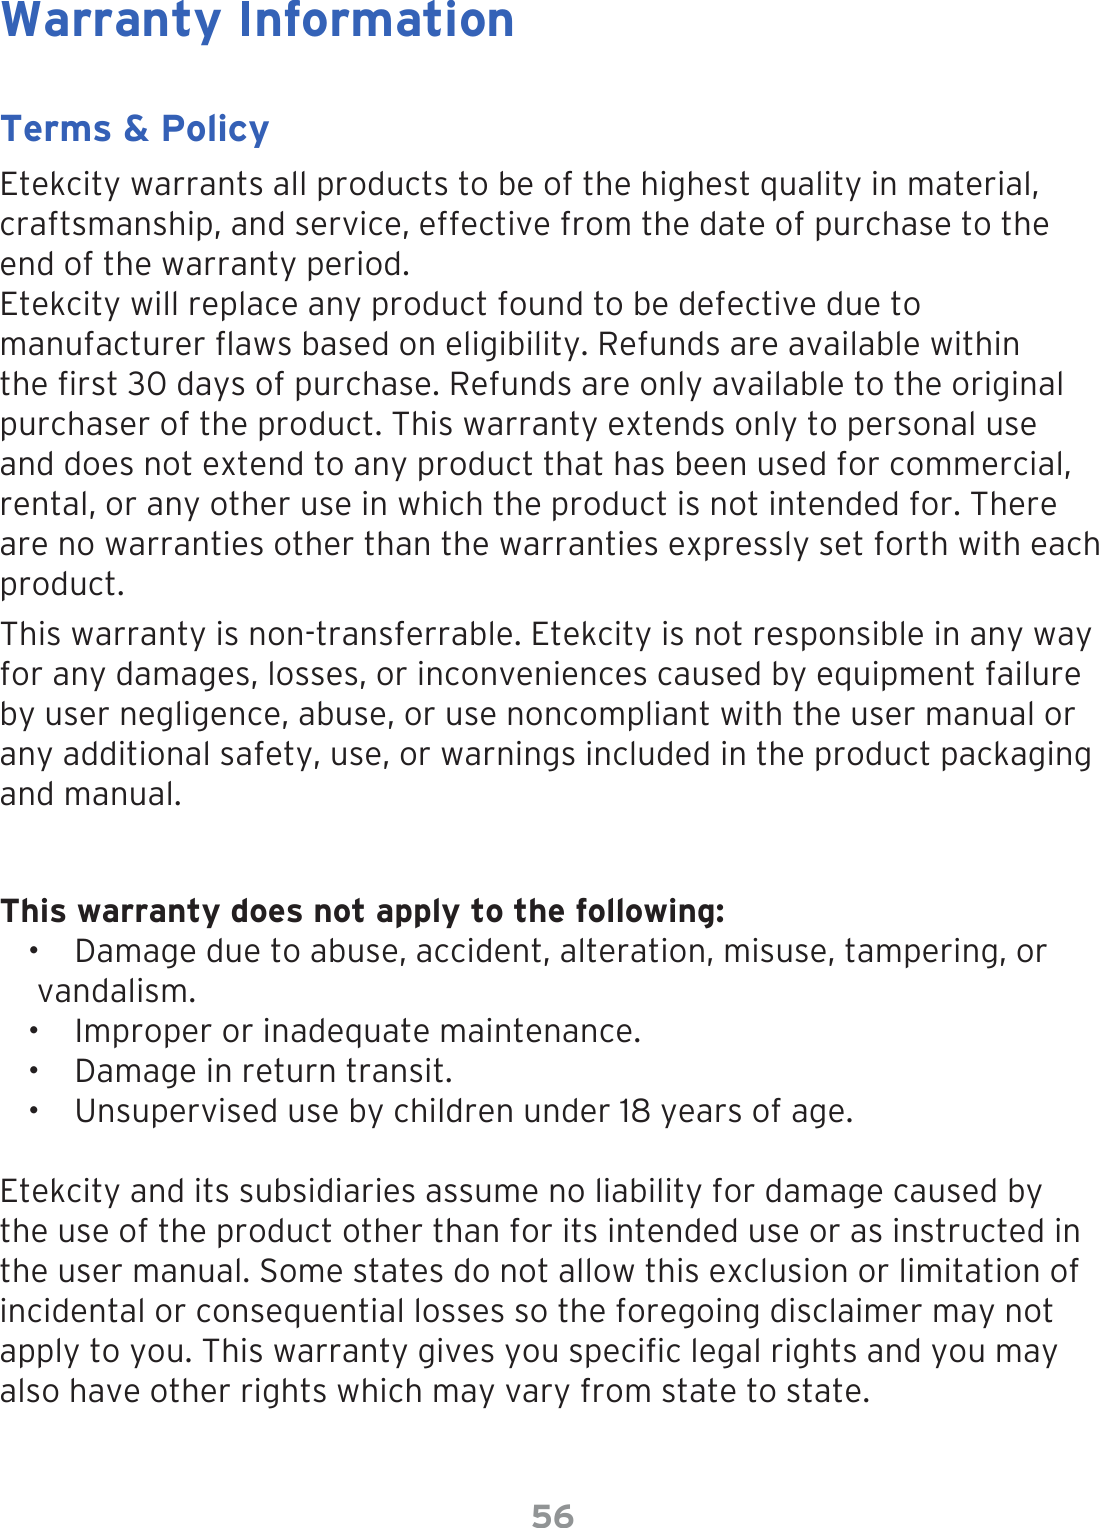 56Warranty InformationTerms &amp; PolicyEtekcity warrants all products to be of the highest quality in material, craftsmanship, and service, effective from the date of purchase to the end of the warranty period.Etekcity will replace any product found to be defective due to manufacturer aws based on eligibility. Refunds are available within the rst 30 days of purchase. Refunds are only available to the original purchaser of the product. This warranty extends only to personal use and does not extend to any product that has been used for commercial, rental, or any other use in which the product is not intended for. There are no warranties other than the warranties expressly set forth with each product.This warranty is non-transferrable. Etekcity is not responsible in any way for any damages, losses, or inconveniences caused by equipment failure by user negligence, abuse, or use noncompliant with the user manual or any additional safety, use, or warnings included in the product packaging and manual.This warranty does not apply to the following:•  Damage due to abuse, accident, alteration, misuse, tampering, or vandalism.•  Improper or inadequate maintenance. •  Damage in return transit.•  Unsupervised use by children under 18 years of age.Etekcity and its subsidiaries assume no liability for damage caused by the use of the product other than for its intended use or as instructed in the user manual. Some states do not allow this exclusion or limitation of incidental or consequential losses so the foregoing disclaimer may not apply to you. This warranty gives you specic legal rights and you may also have other rights which may vary from state to state.